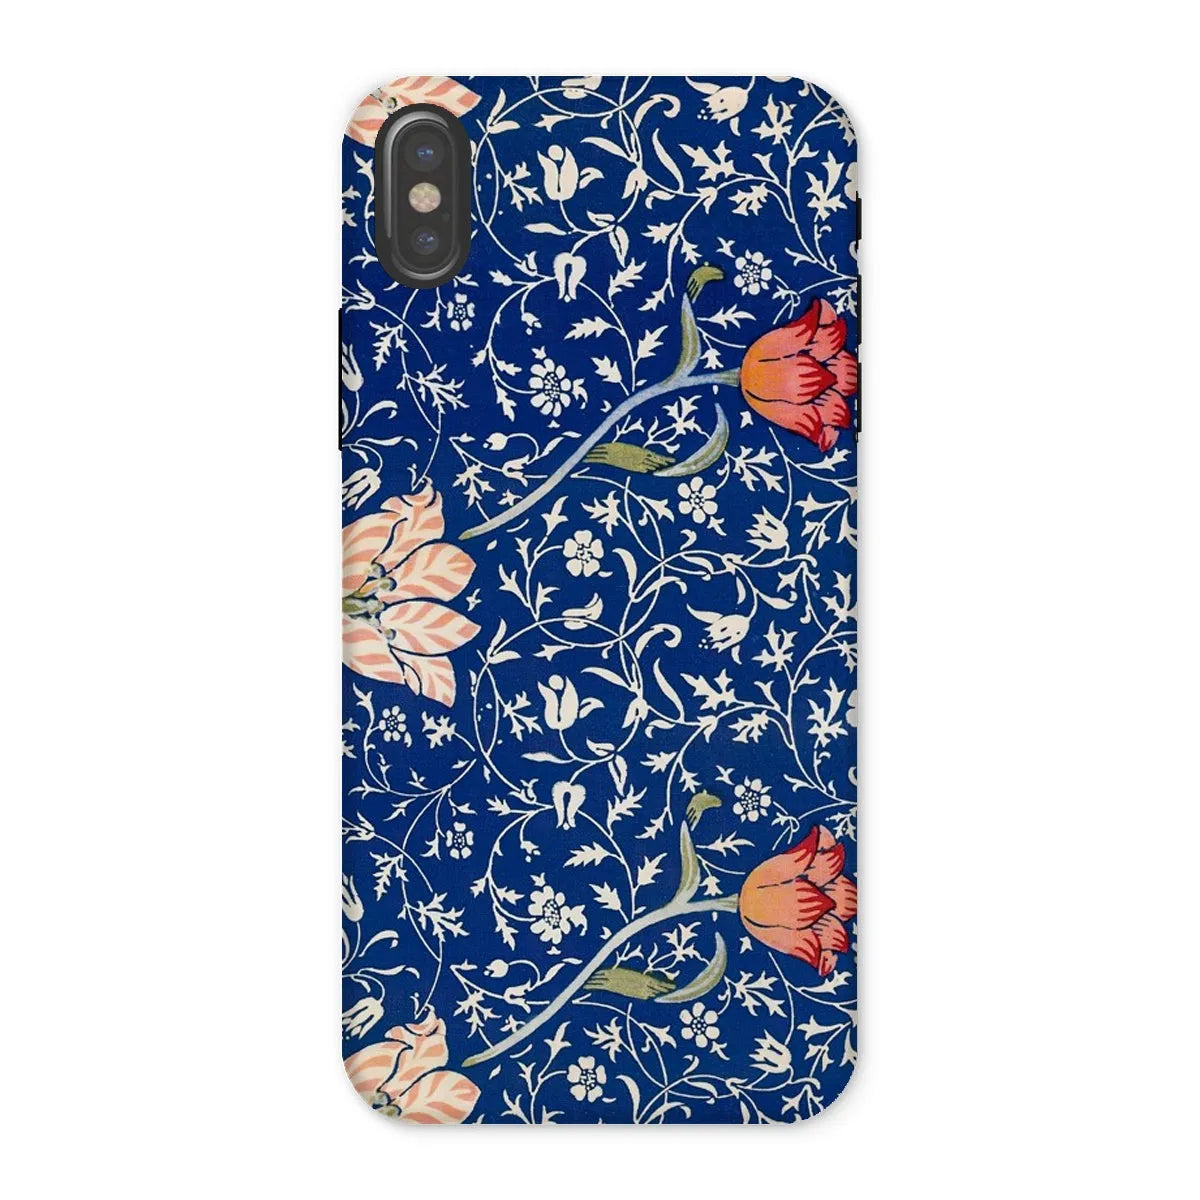 Medway - Floral Aesthetic Art Phone Case - William Morris - Iphone x / Matte - Mobile Phone Cases - Aesthetic Art